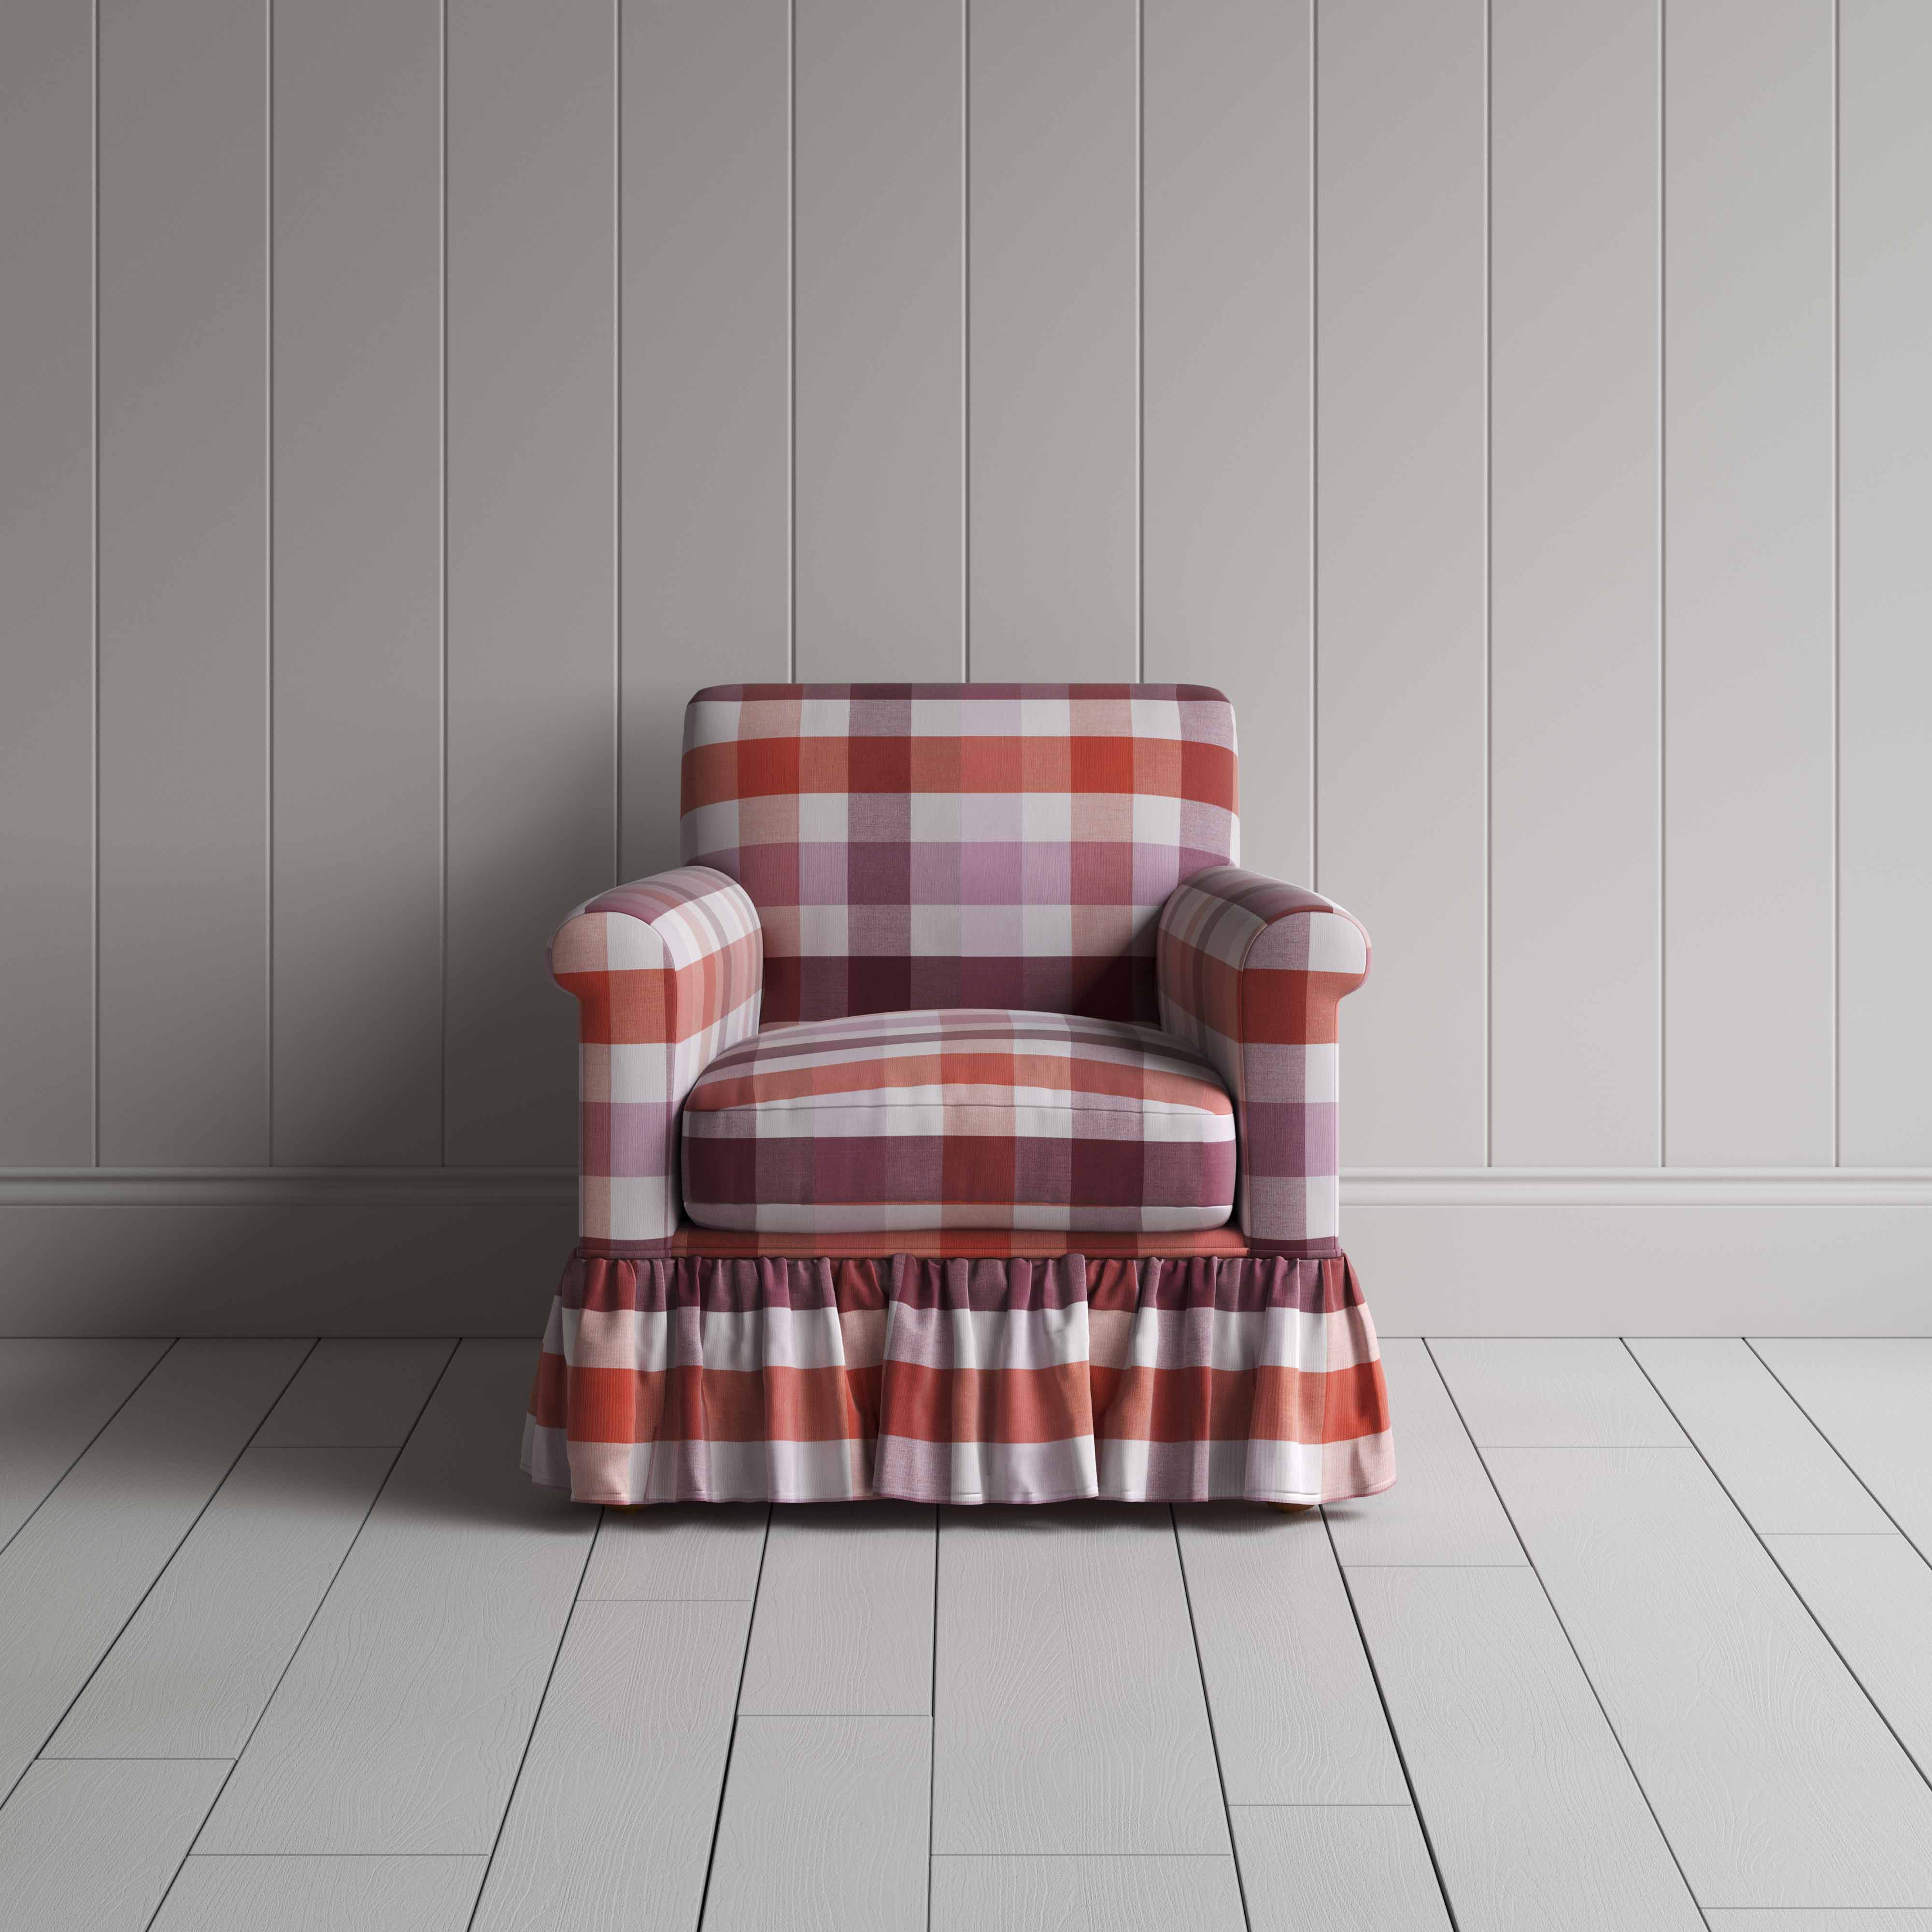  Curtain Call Armchair in Checkmate Cotton, Berry 